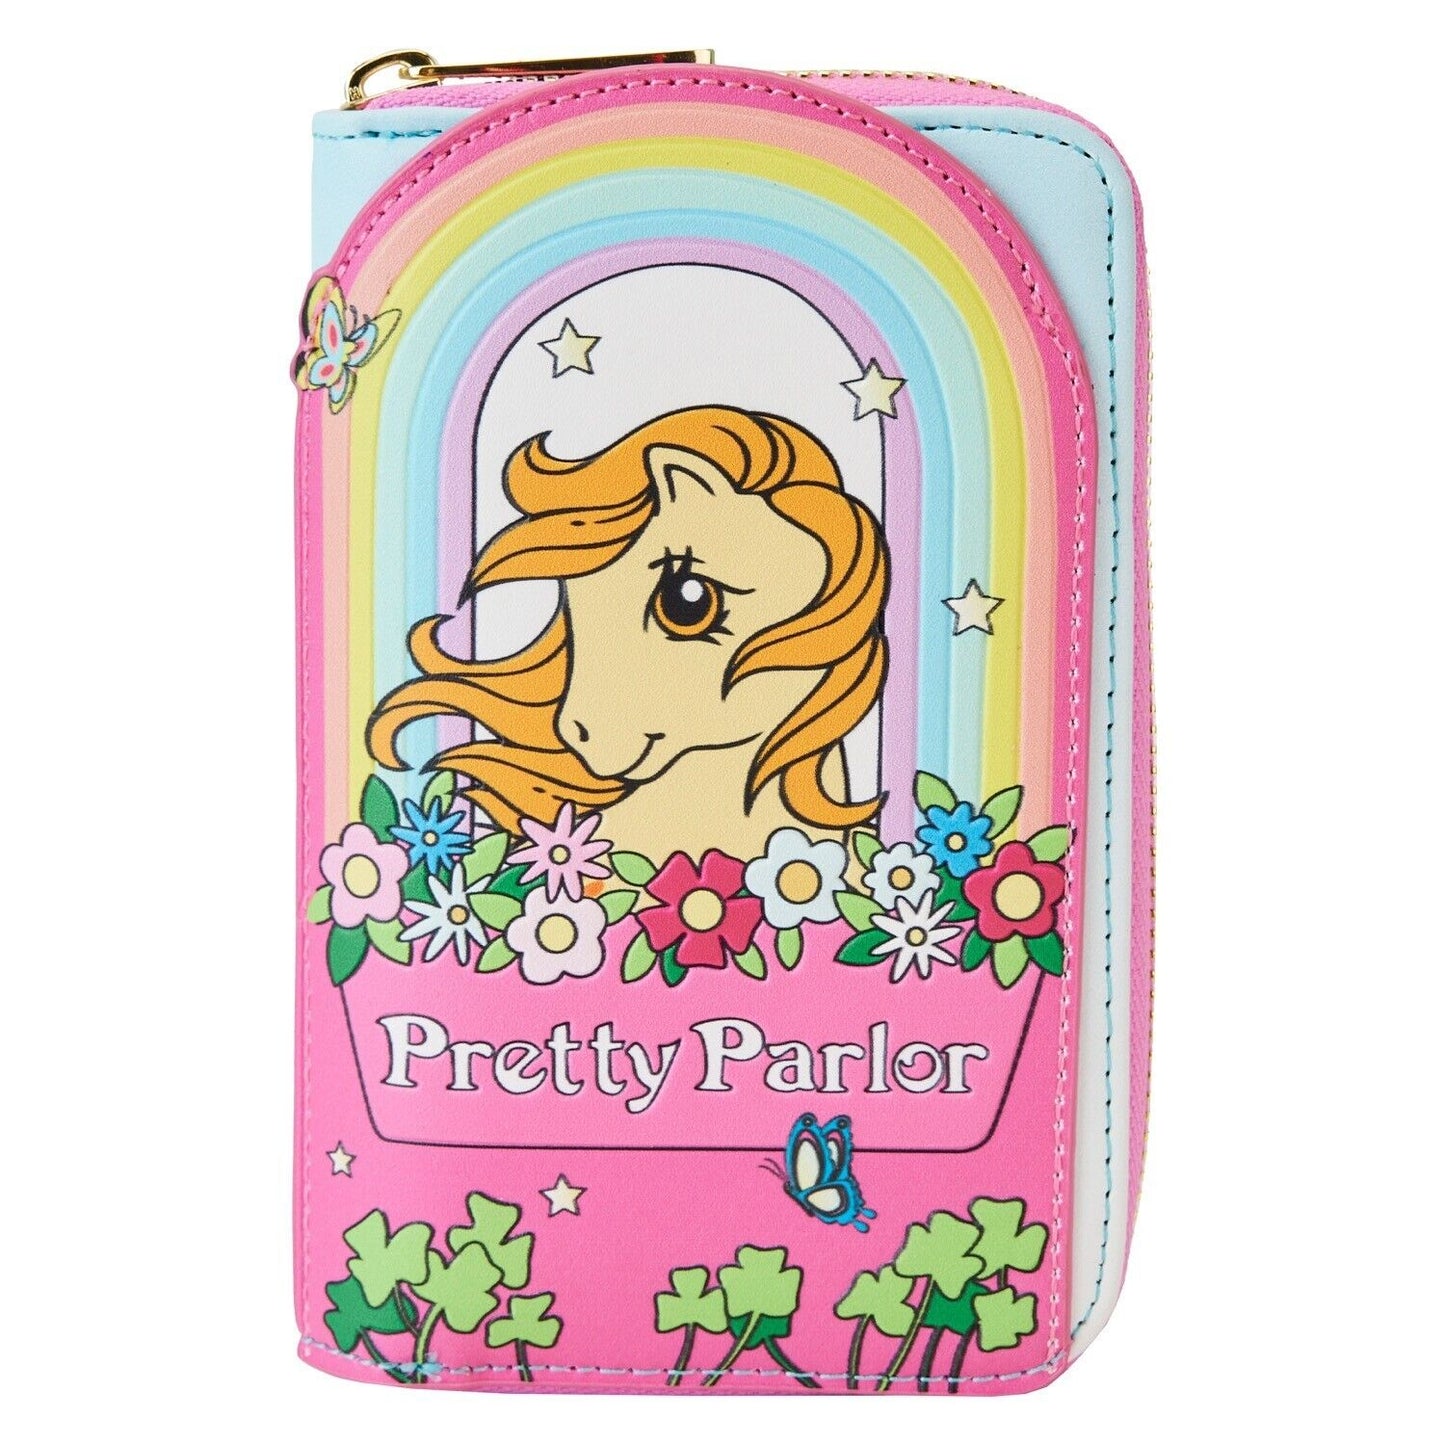 Loungefly My Little Pony 40th Anniversary Pretty Parlor Wallet